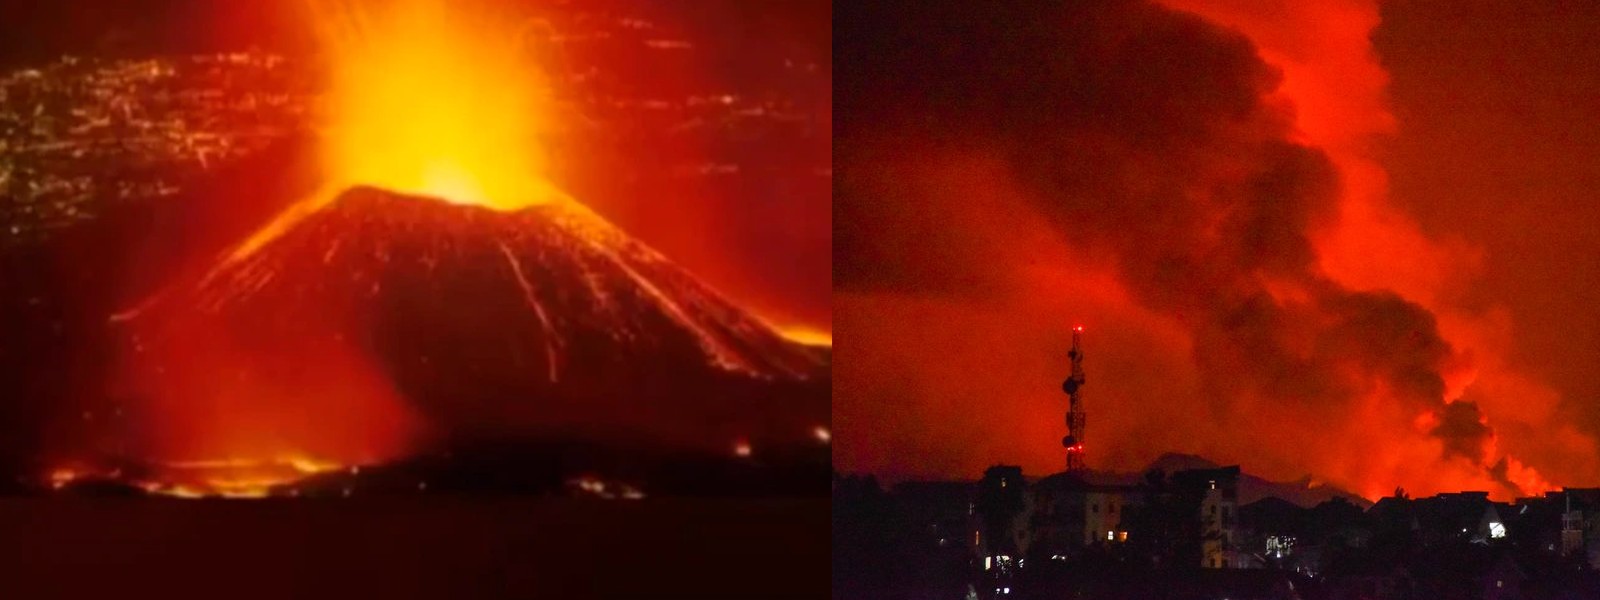 Congo volcano erupts for first time in years, sending people fleeing from major city